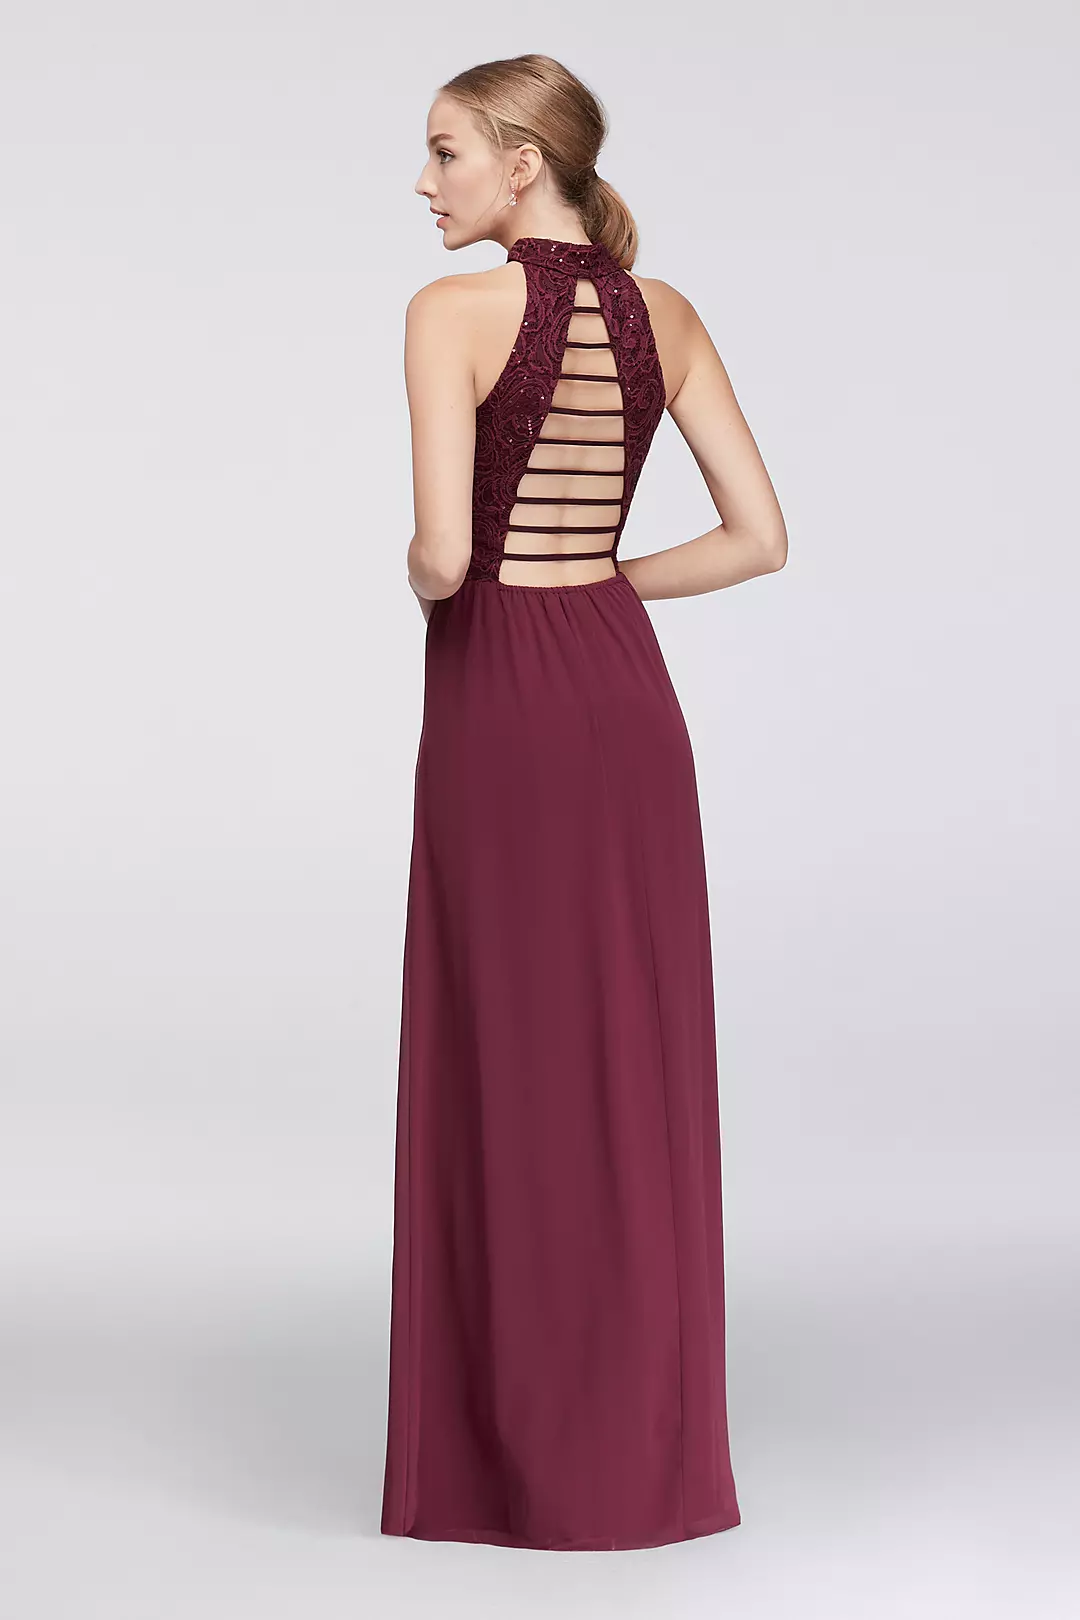 Chiffon High-Neck Gown with Ladder Back Detail | David's Bridal